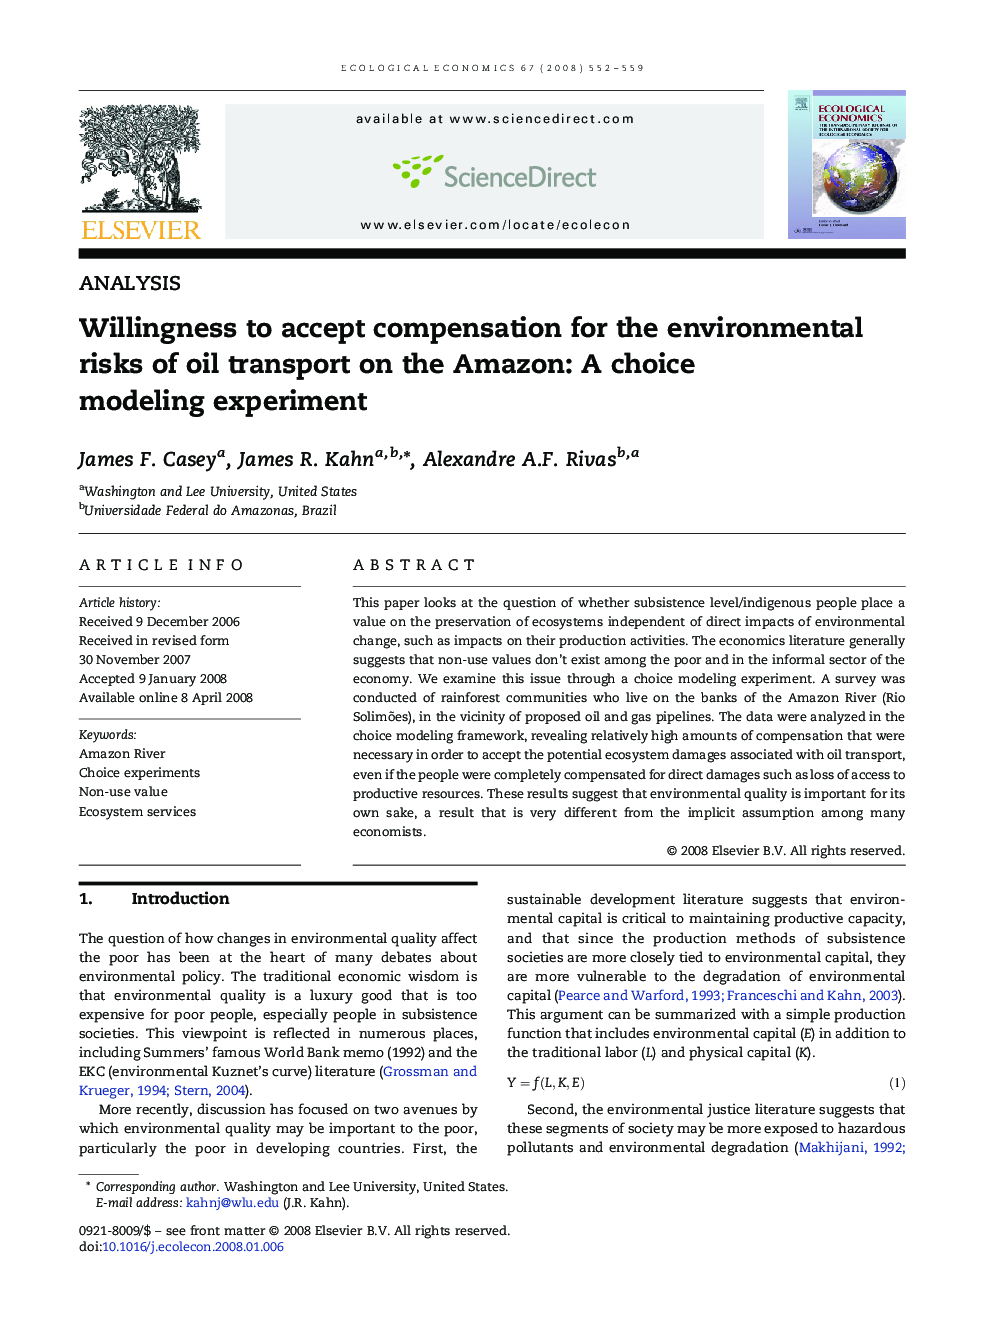 Willingness to accept compensation for the environmental risks of oil transport on the Amazon: A choice modeling experiment